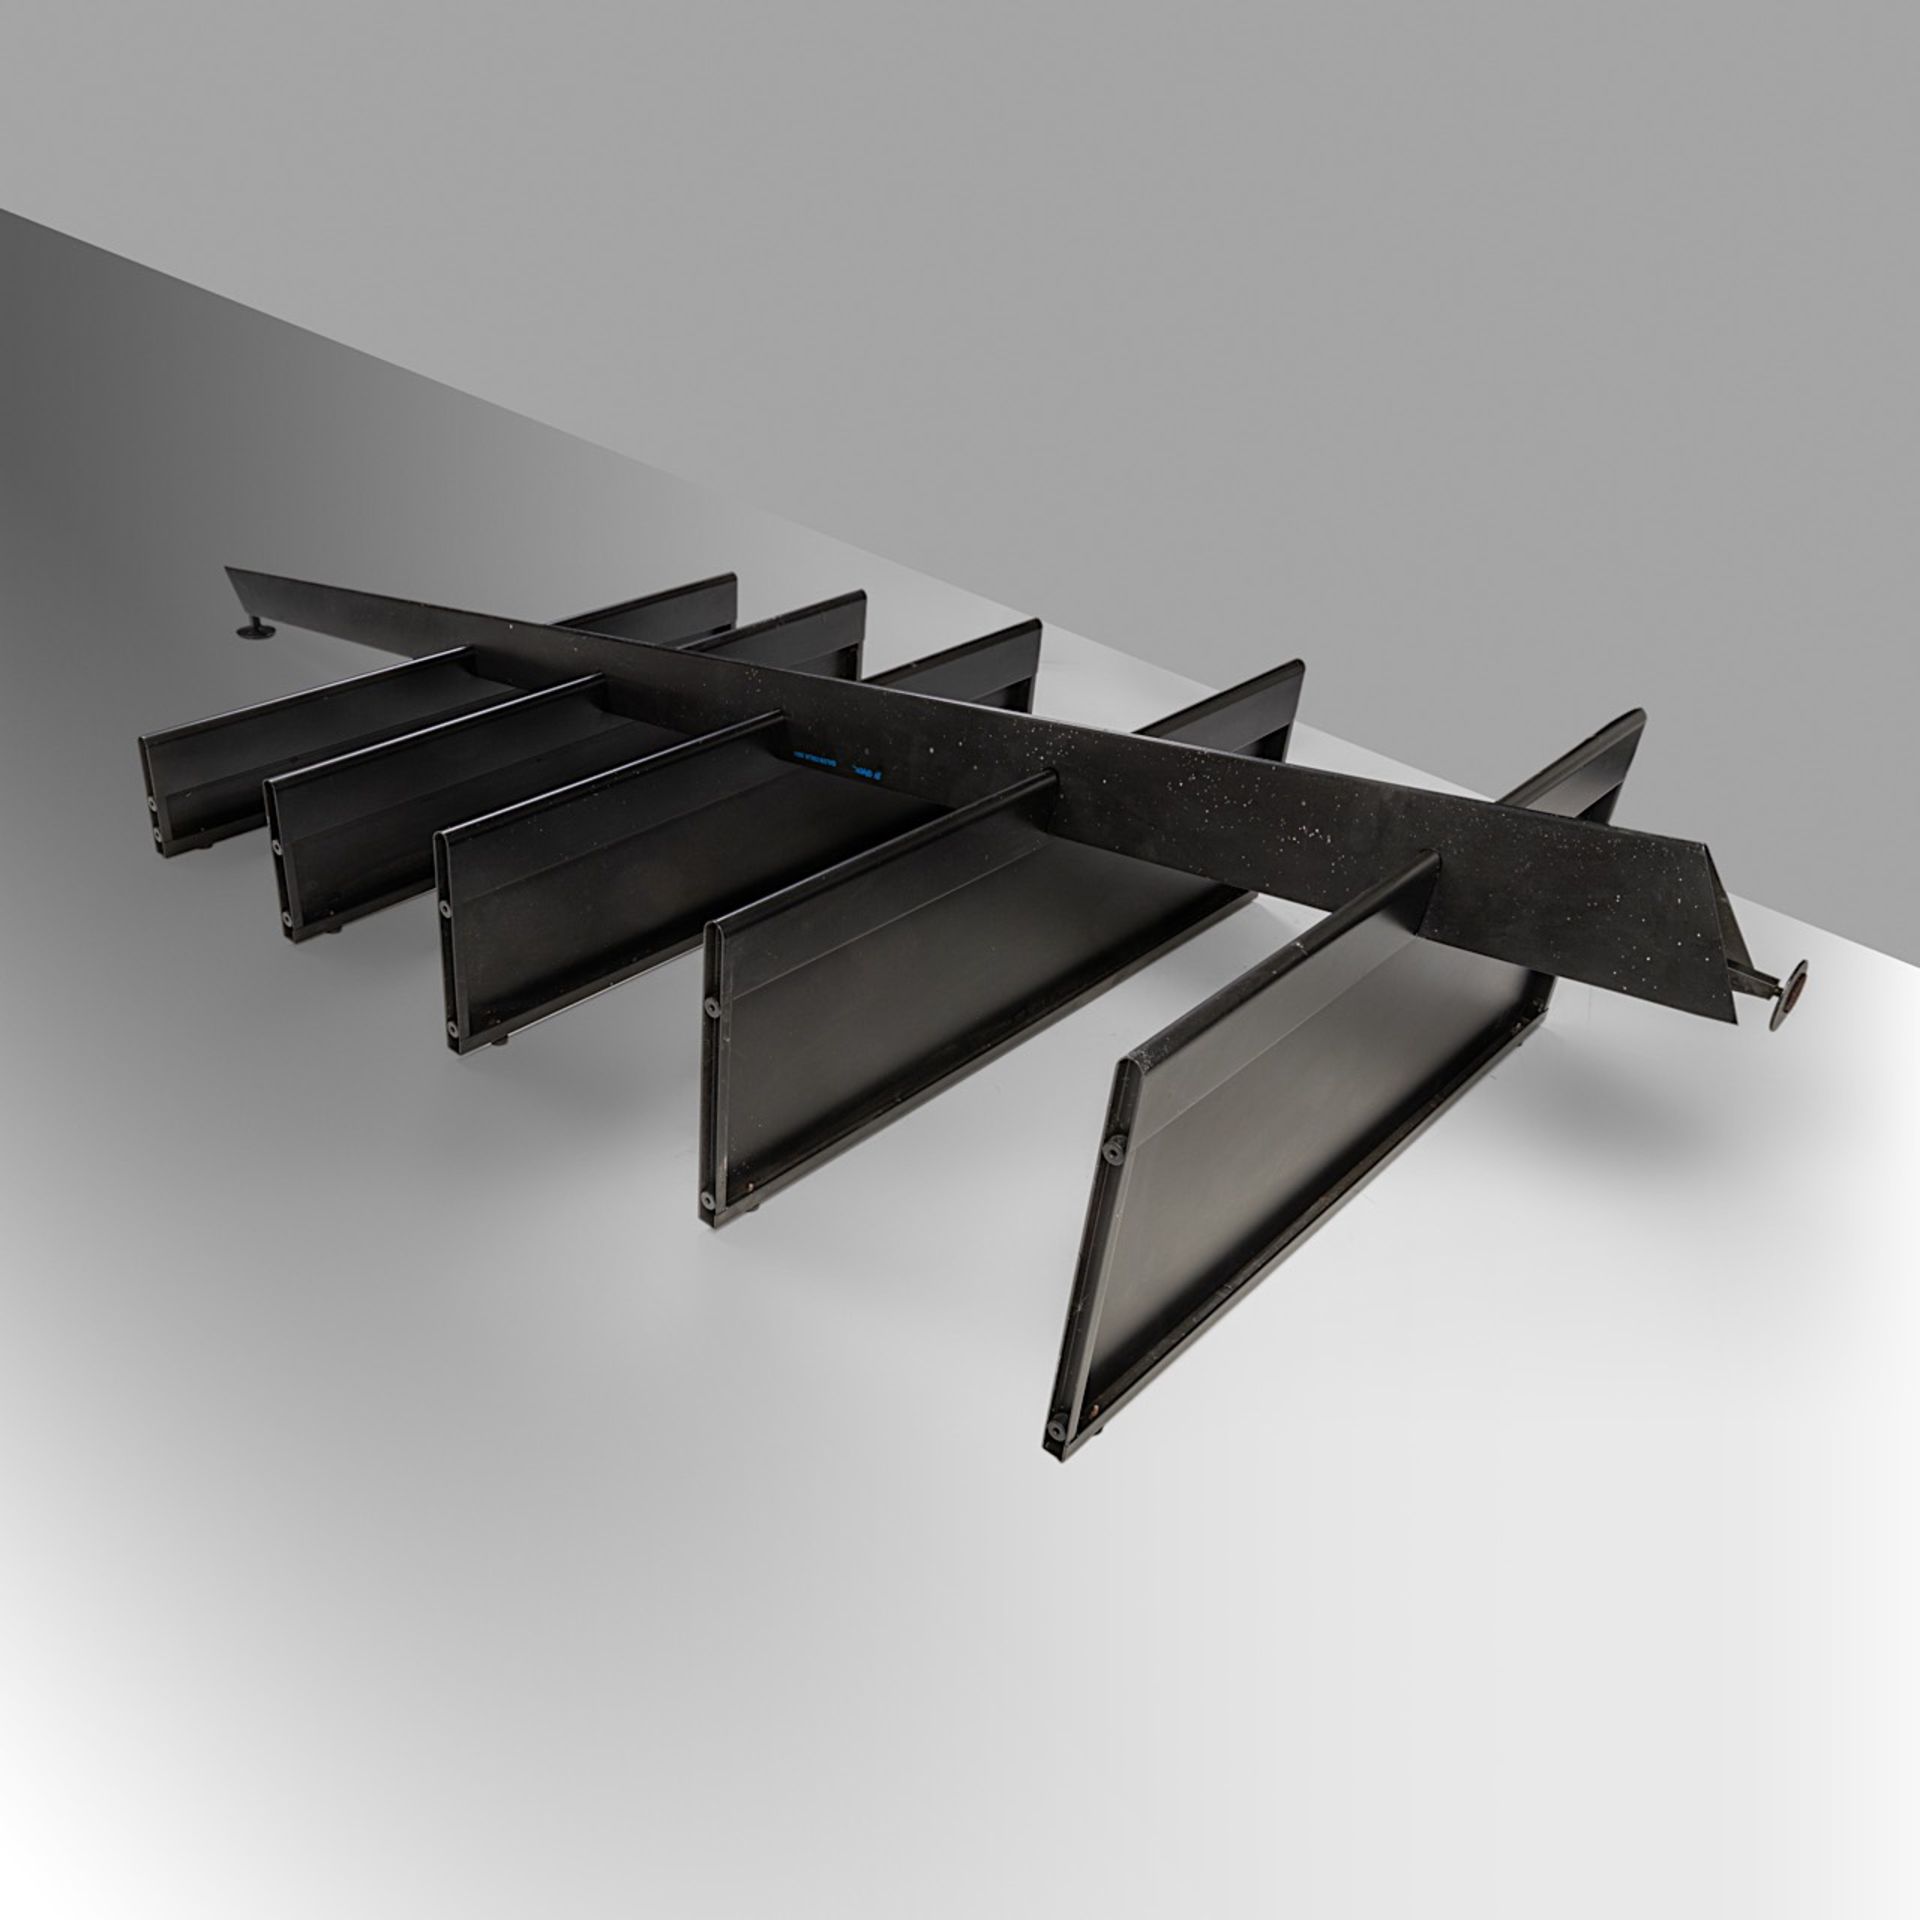 A black lacquered 'McGee' design rack by Philippe Starck for Baleri, 1980s, H 240 - W 100 cm - Image 2 of 5